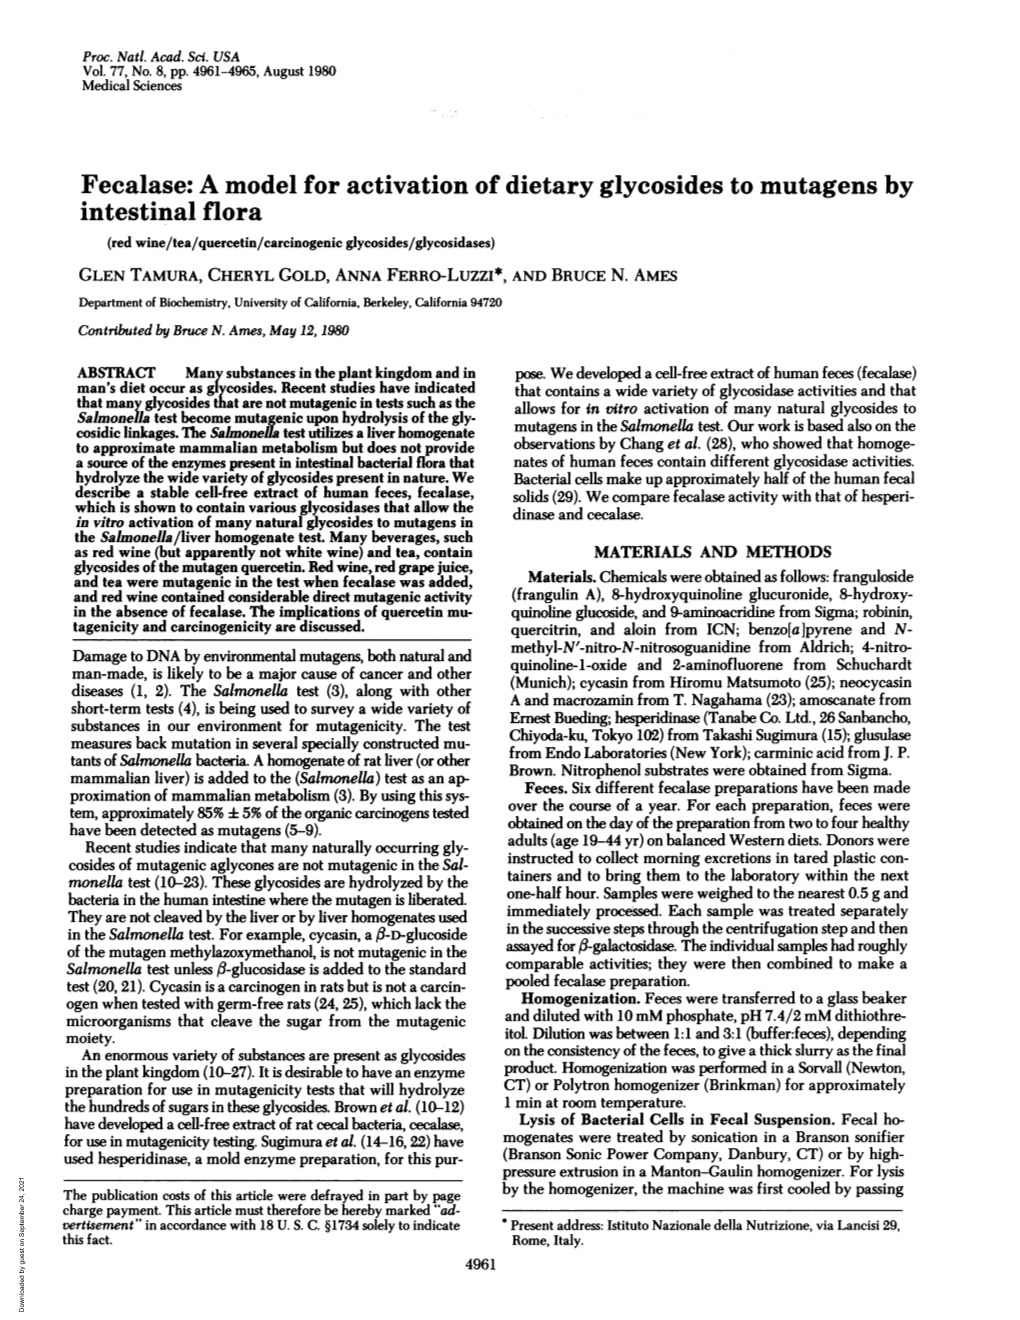 Fecalase: a Model for Activation of Dietary Glycosides to Mutagens By